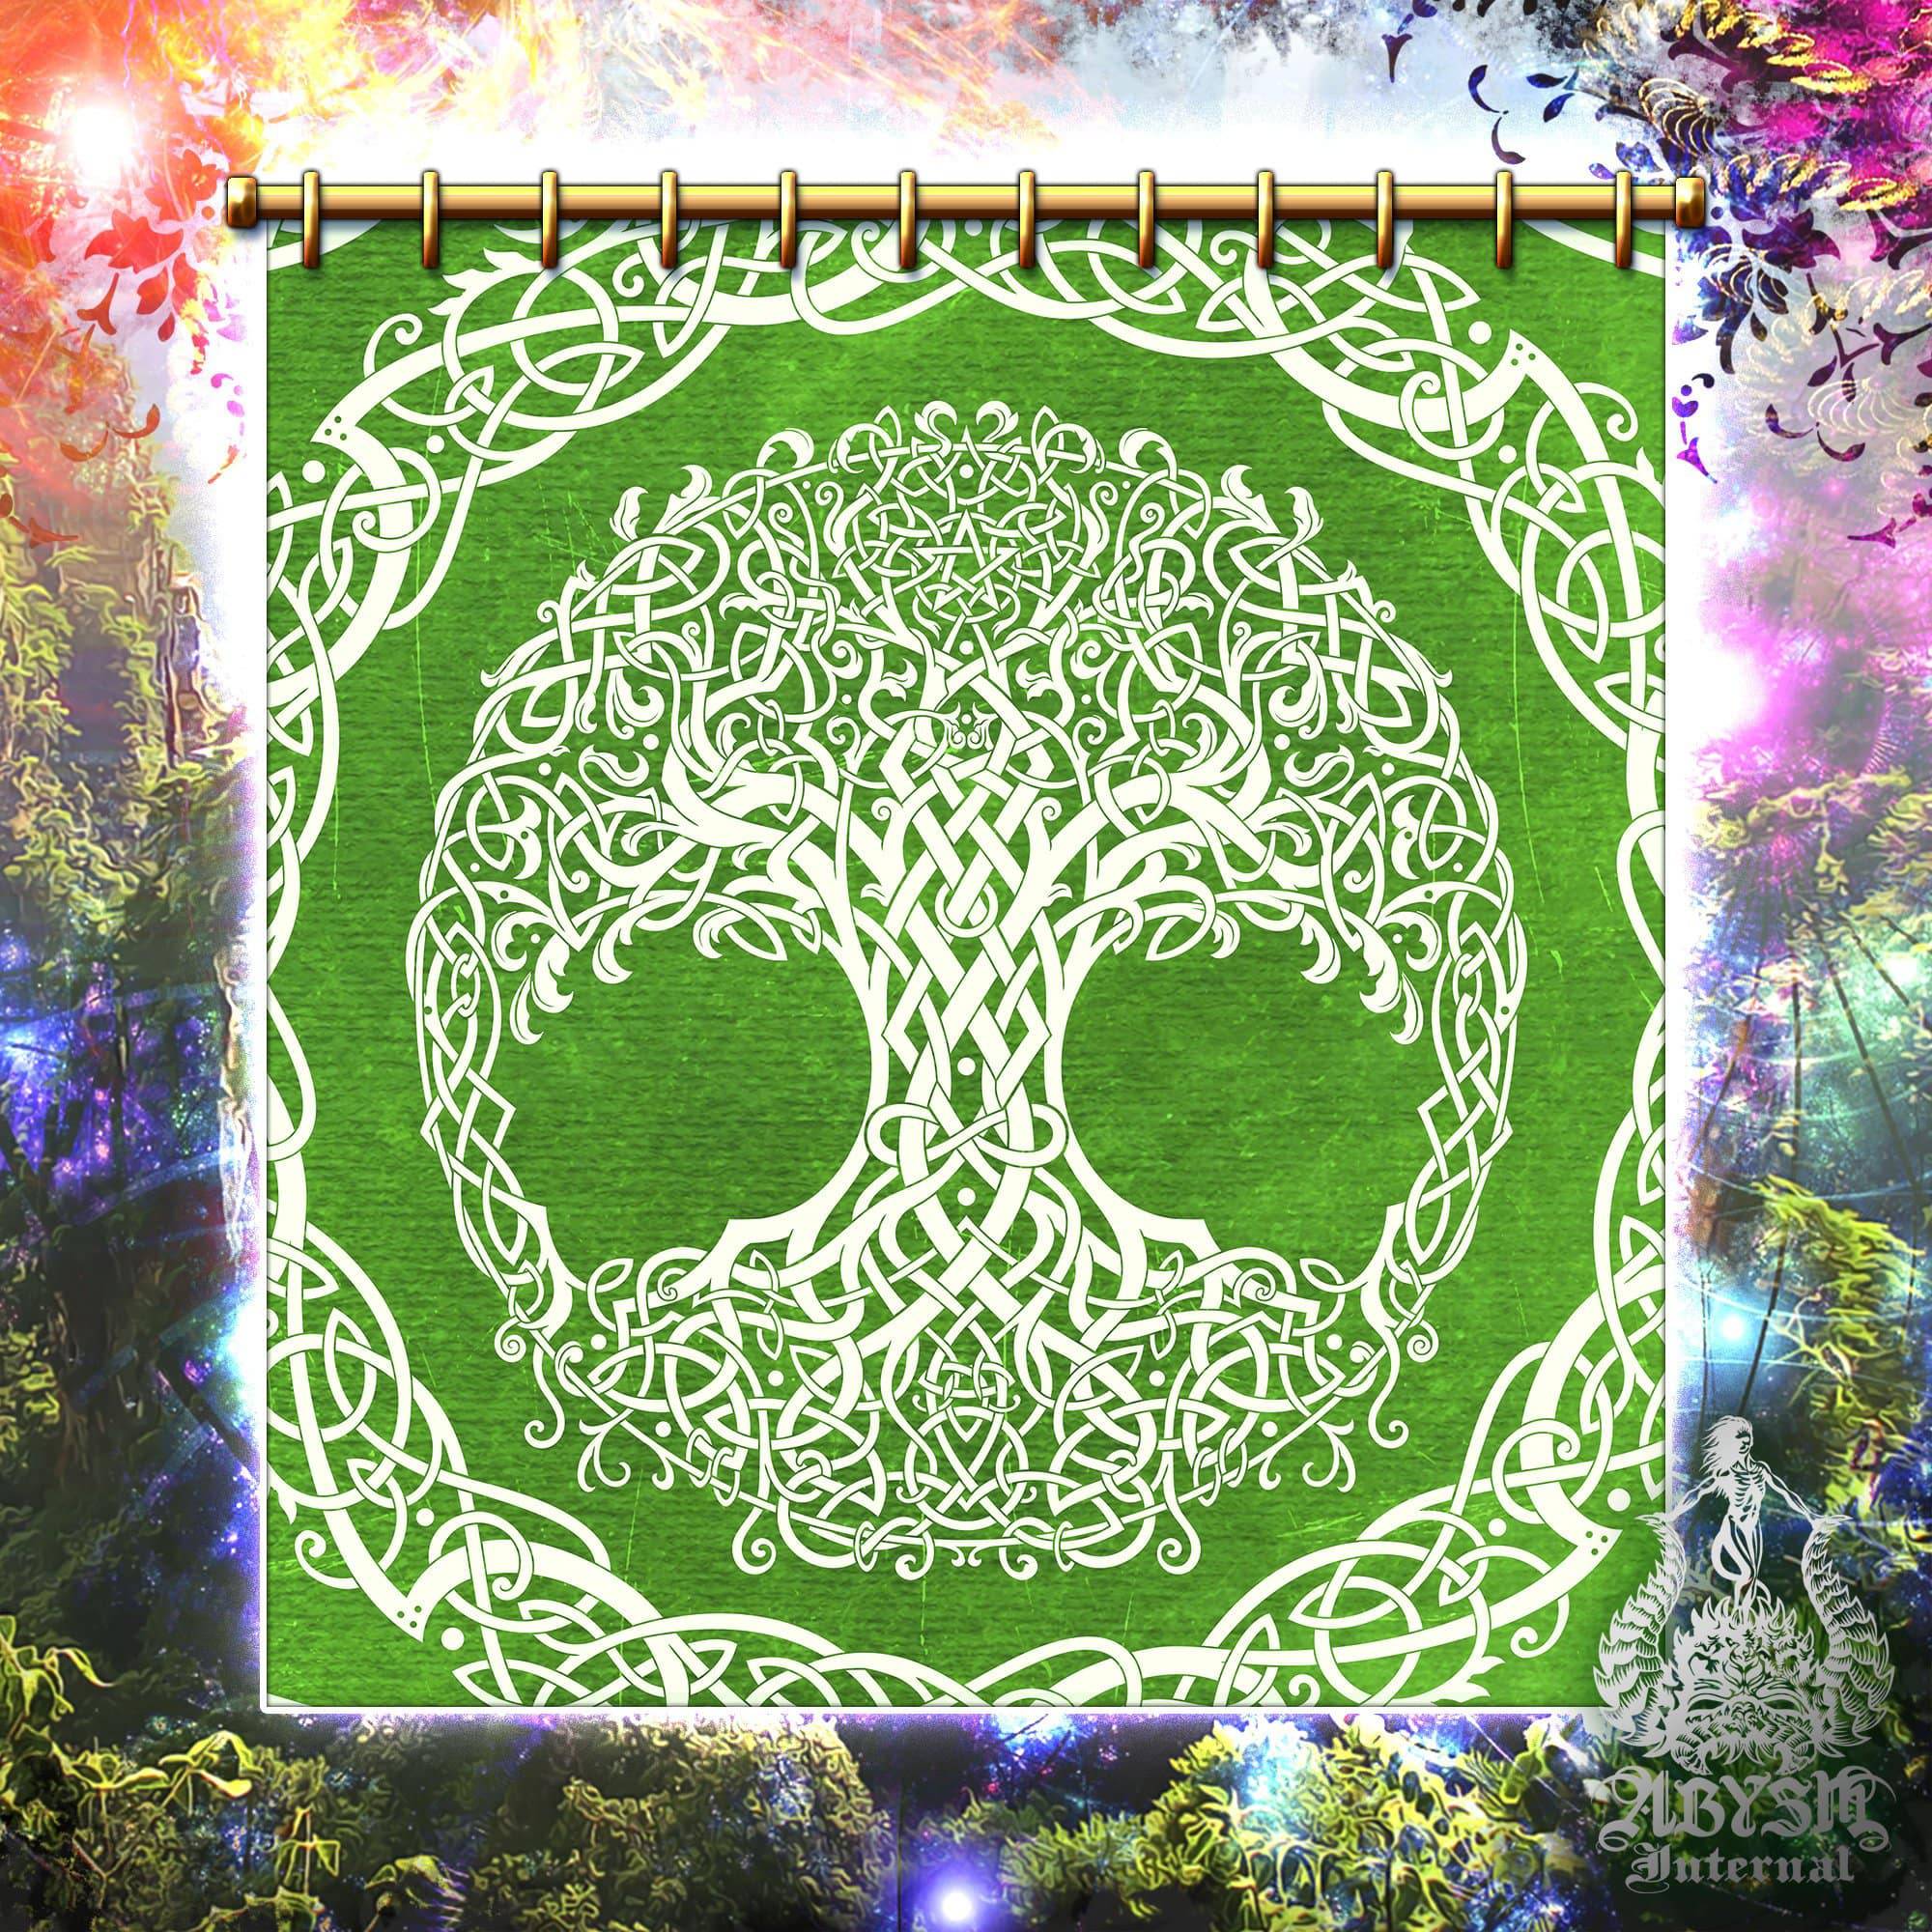 Tree of Life Shower Curtain, Boho and Pagan Bathroom Decor, Celtic Knot, Eclectic and Funky Home - Green - Abysm Internal